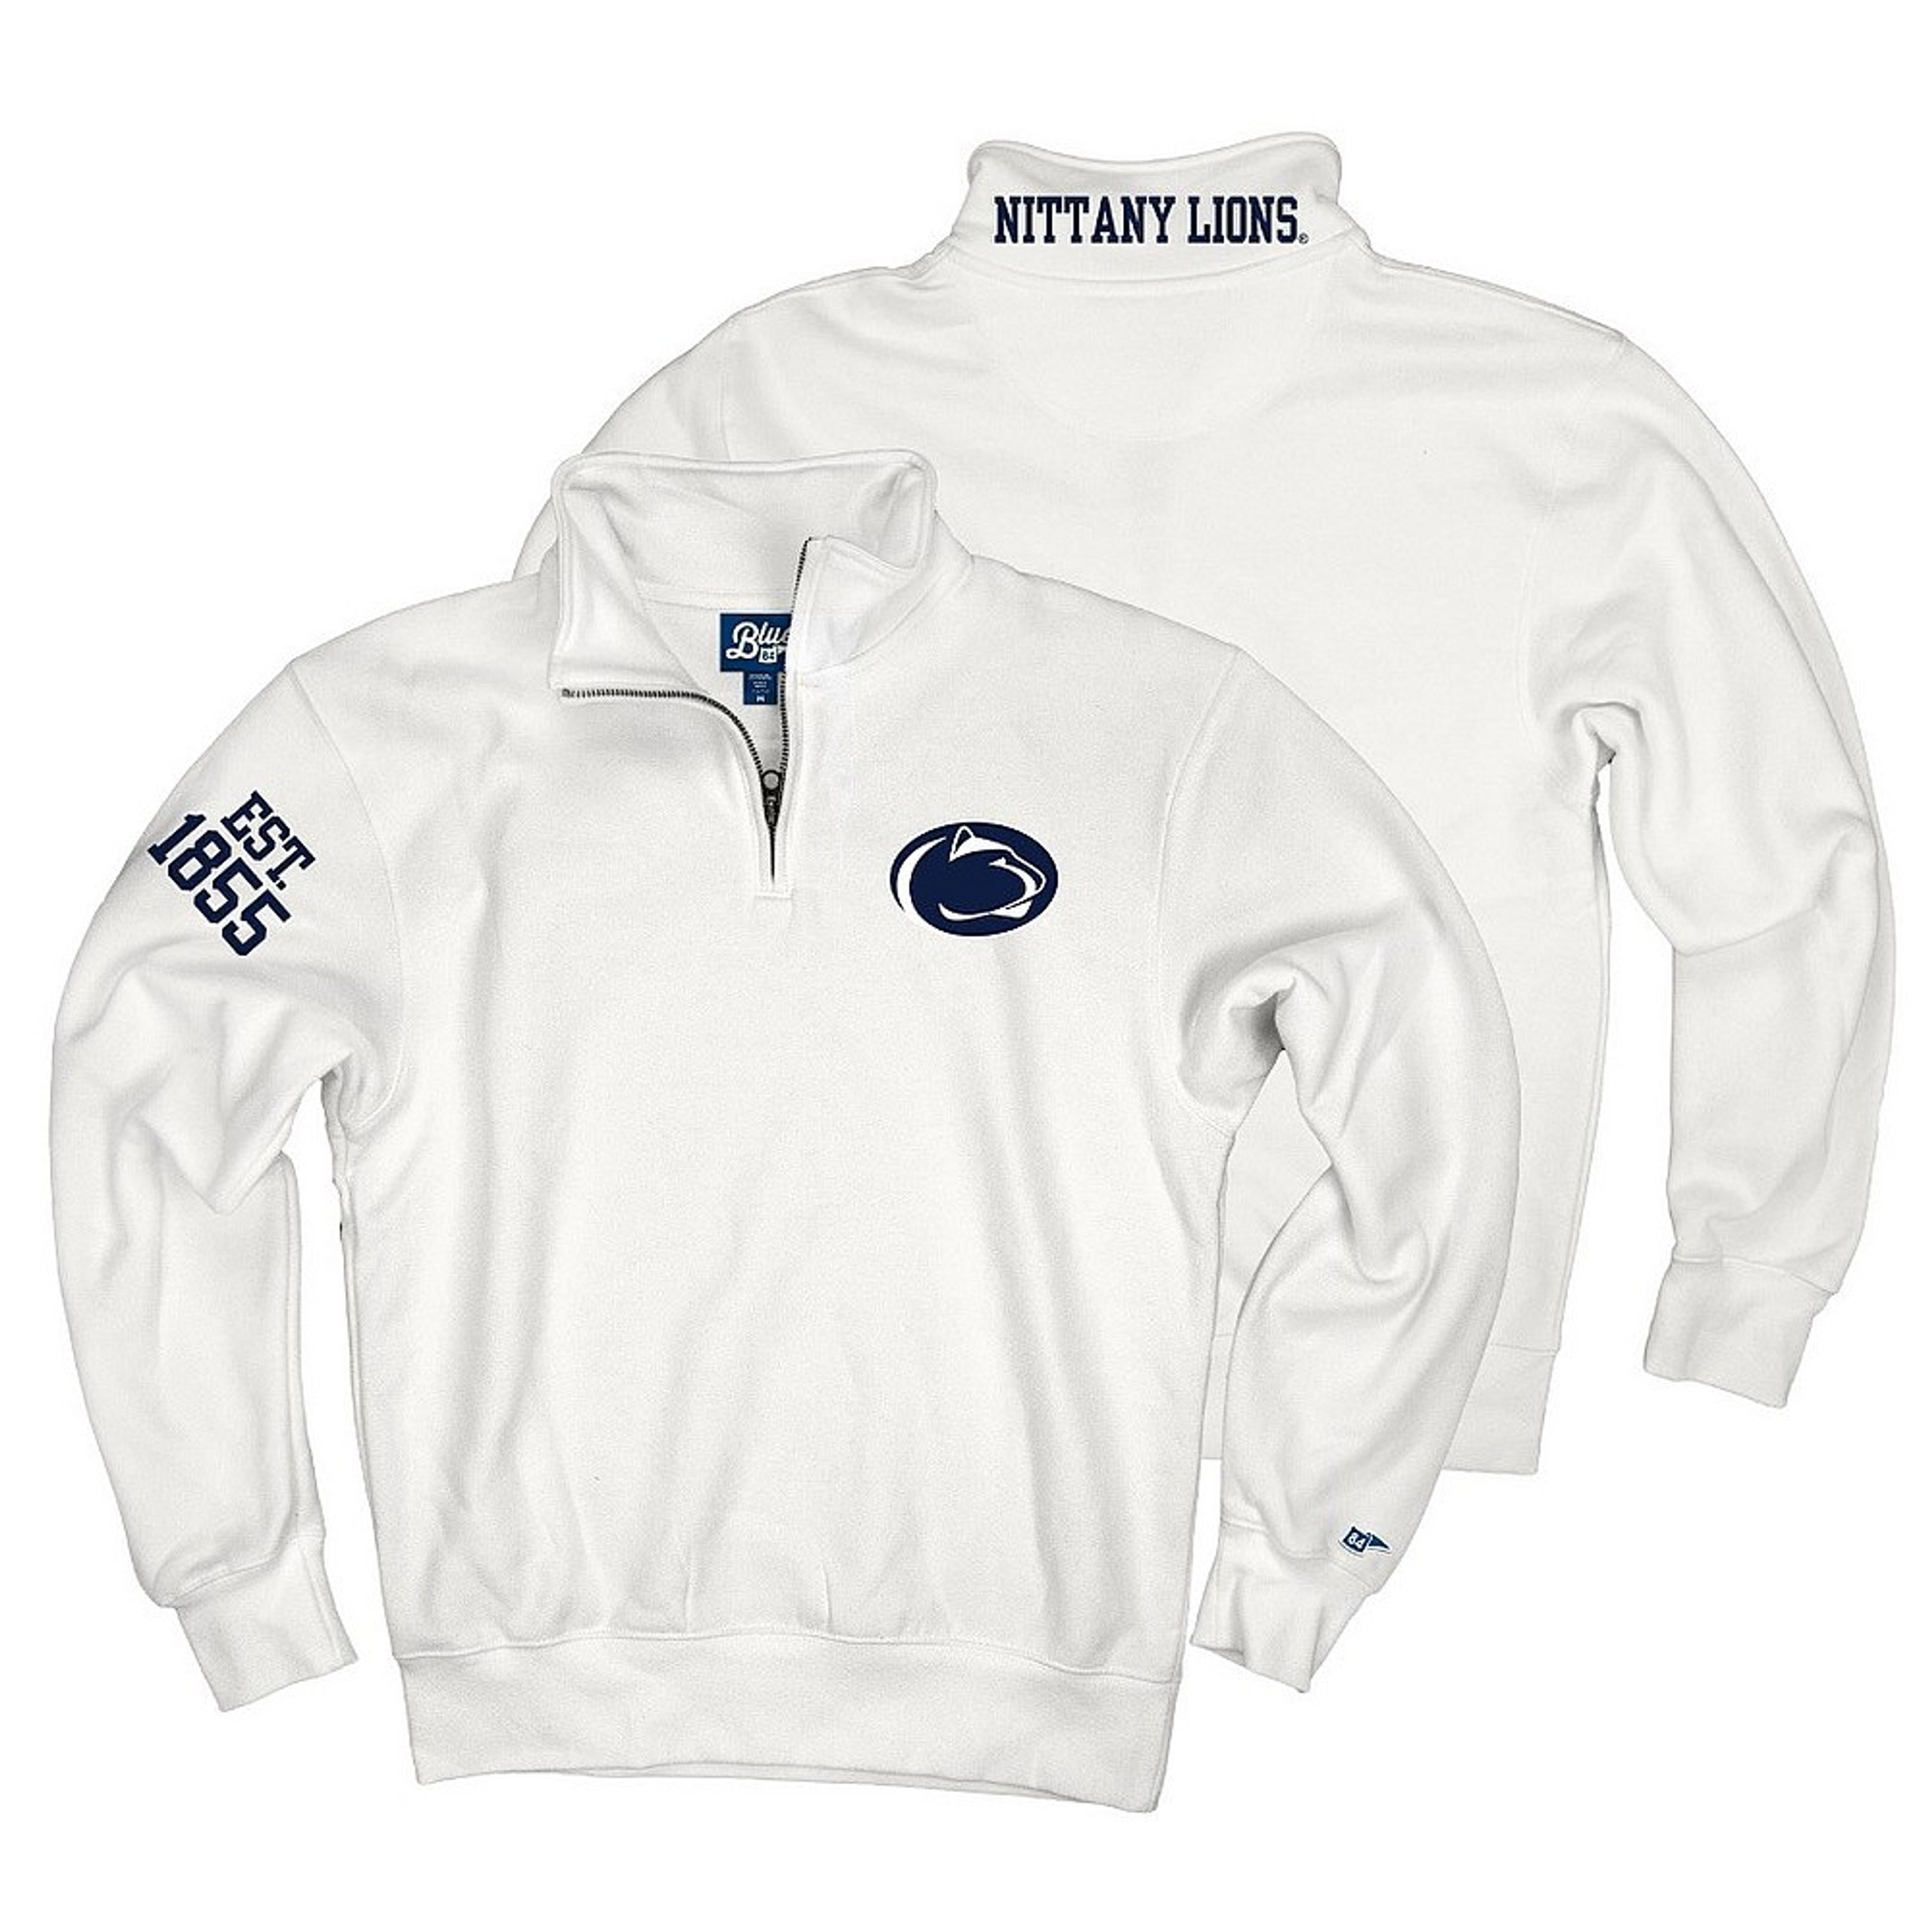 Penn State White Embroidered Quarter Zip Nittany Lions (PSU)